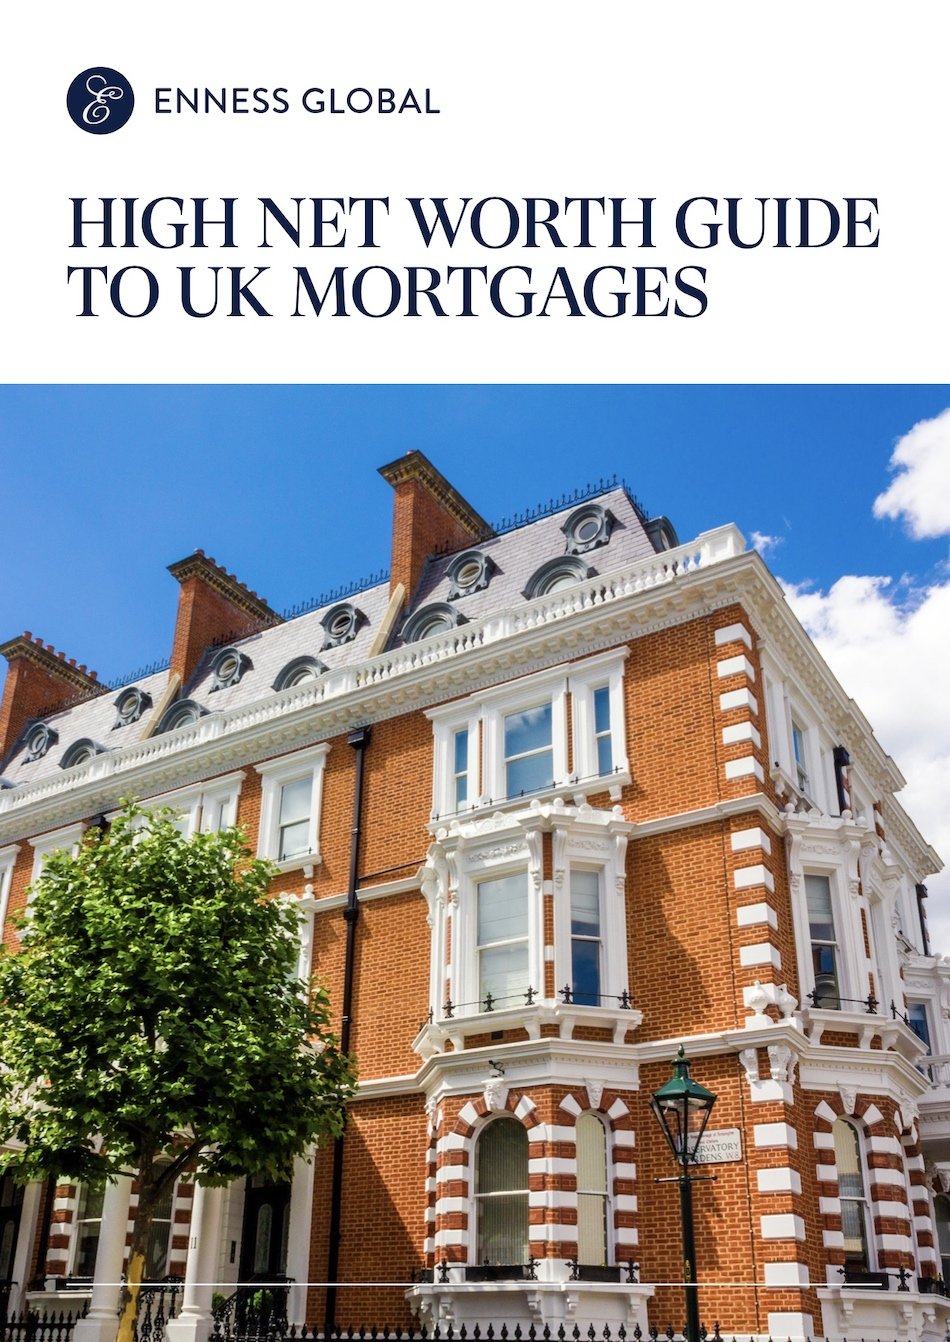 High Net Worth Guide to UK Mortgage.jpg